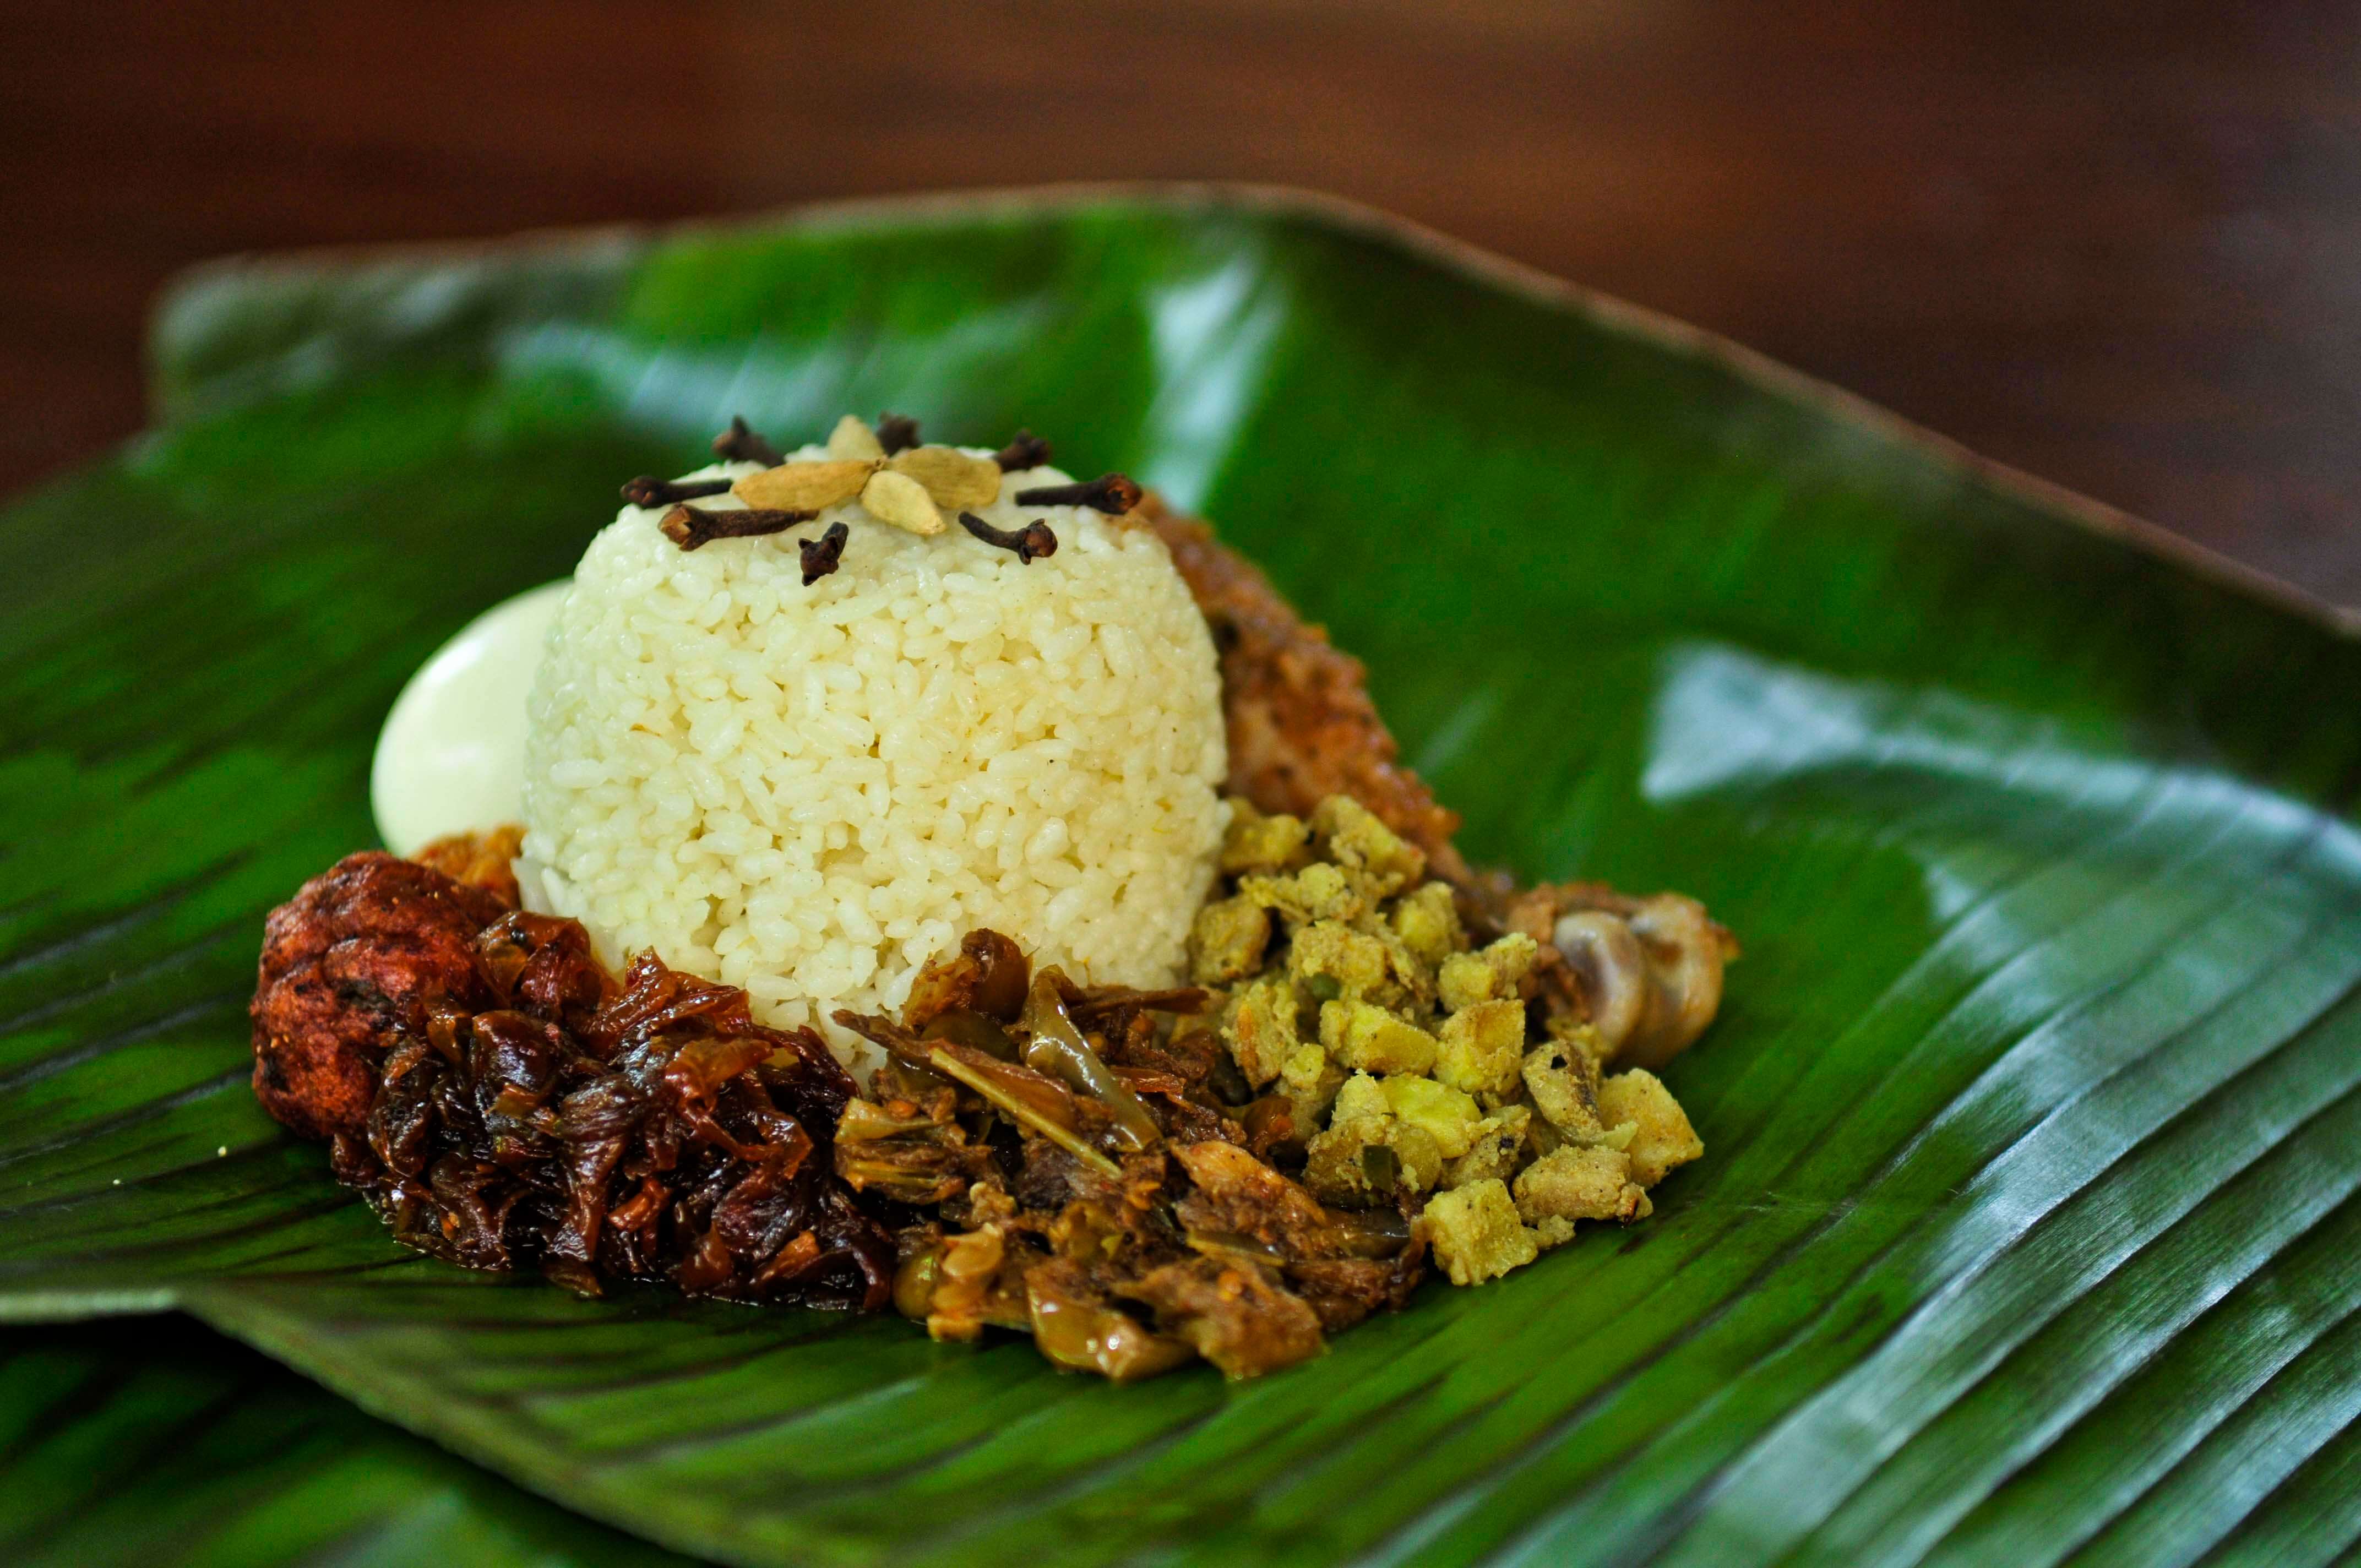 riceand meat on a banana leaf